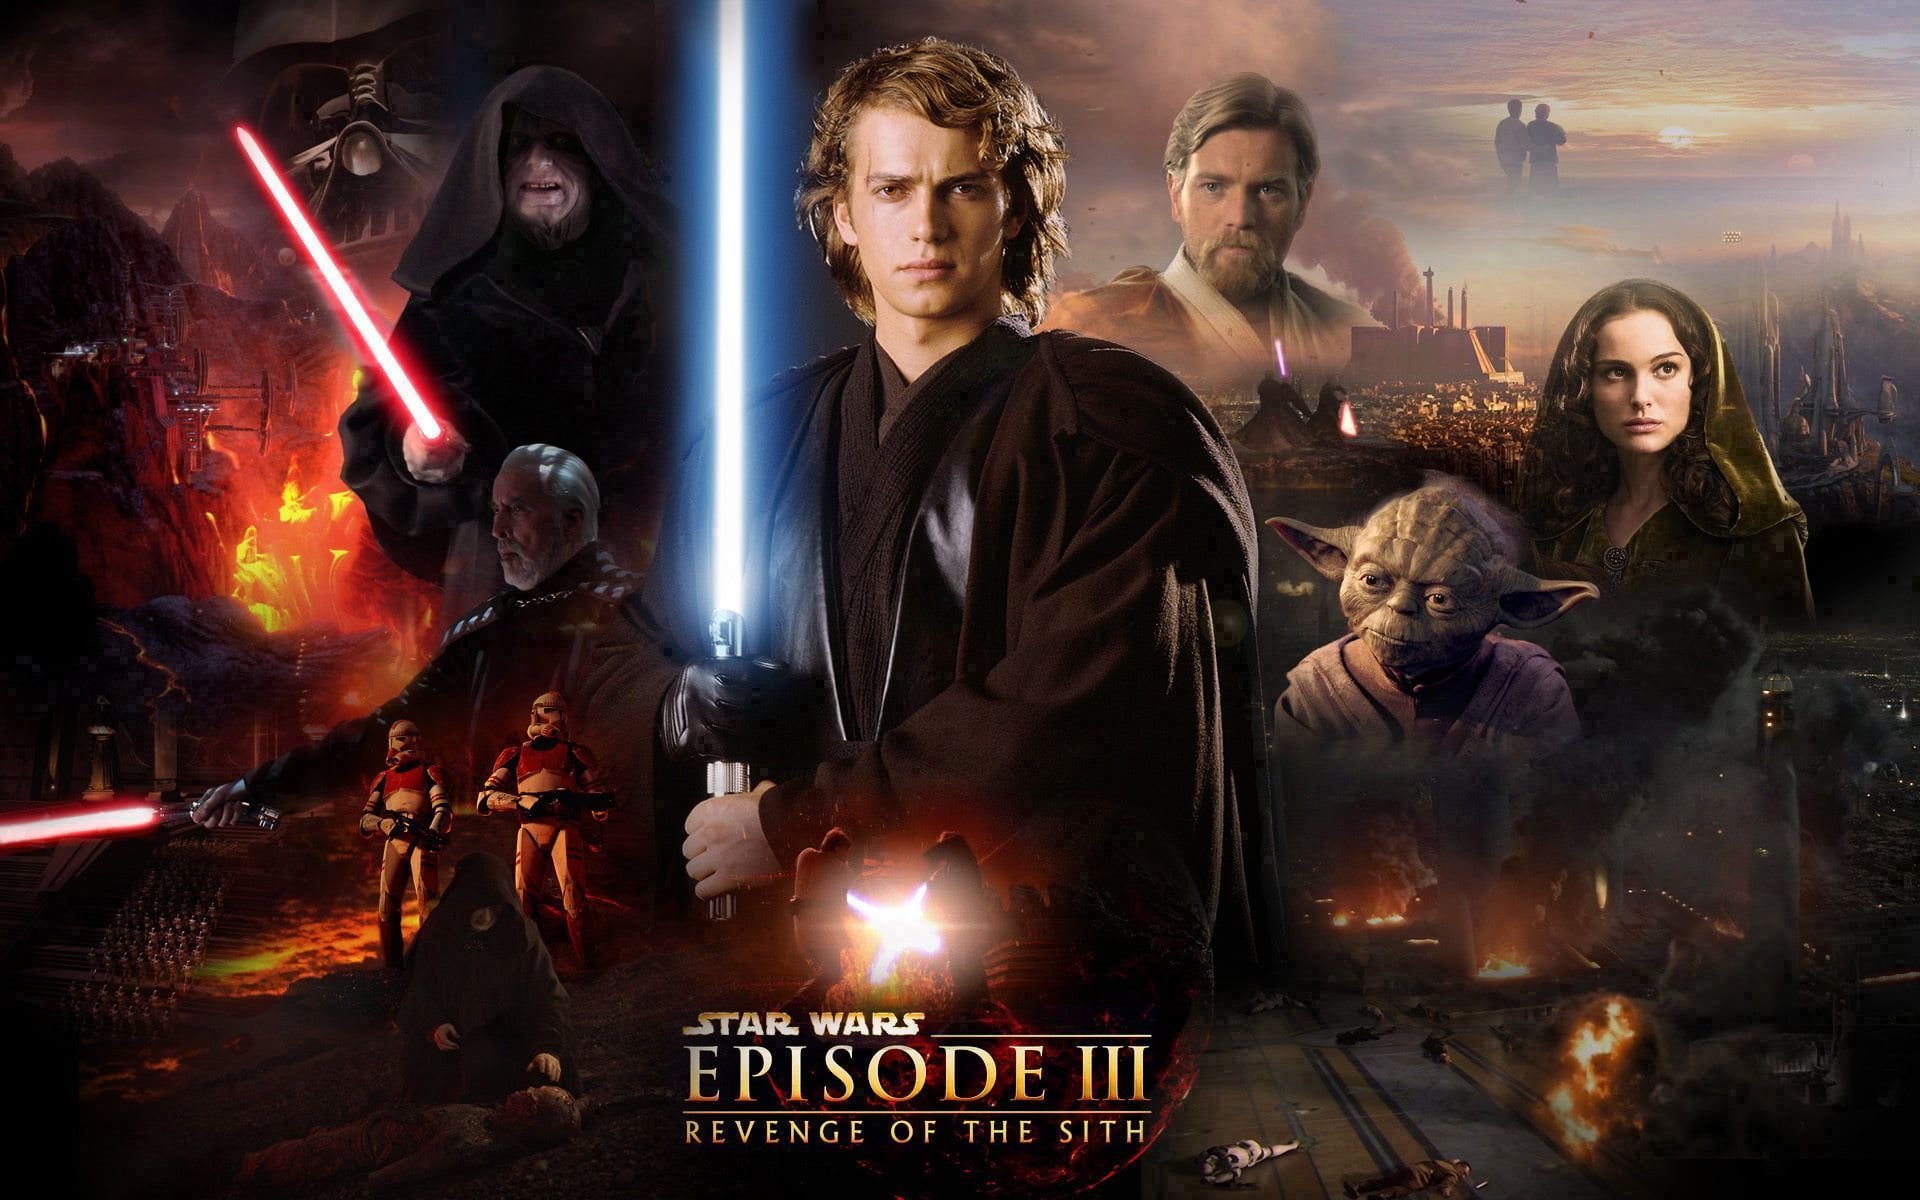 Revenge of the Sith Wallpaper Free Revenge of the Sith Background